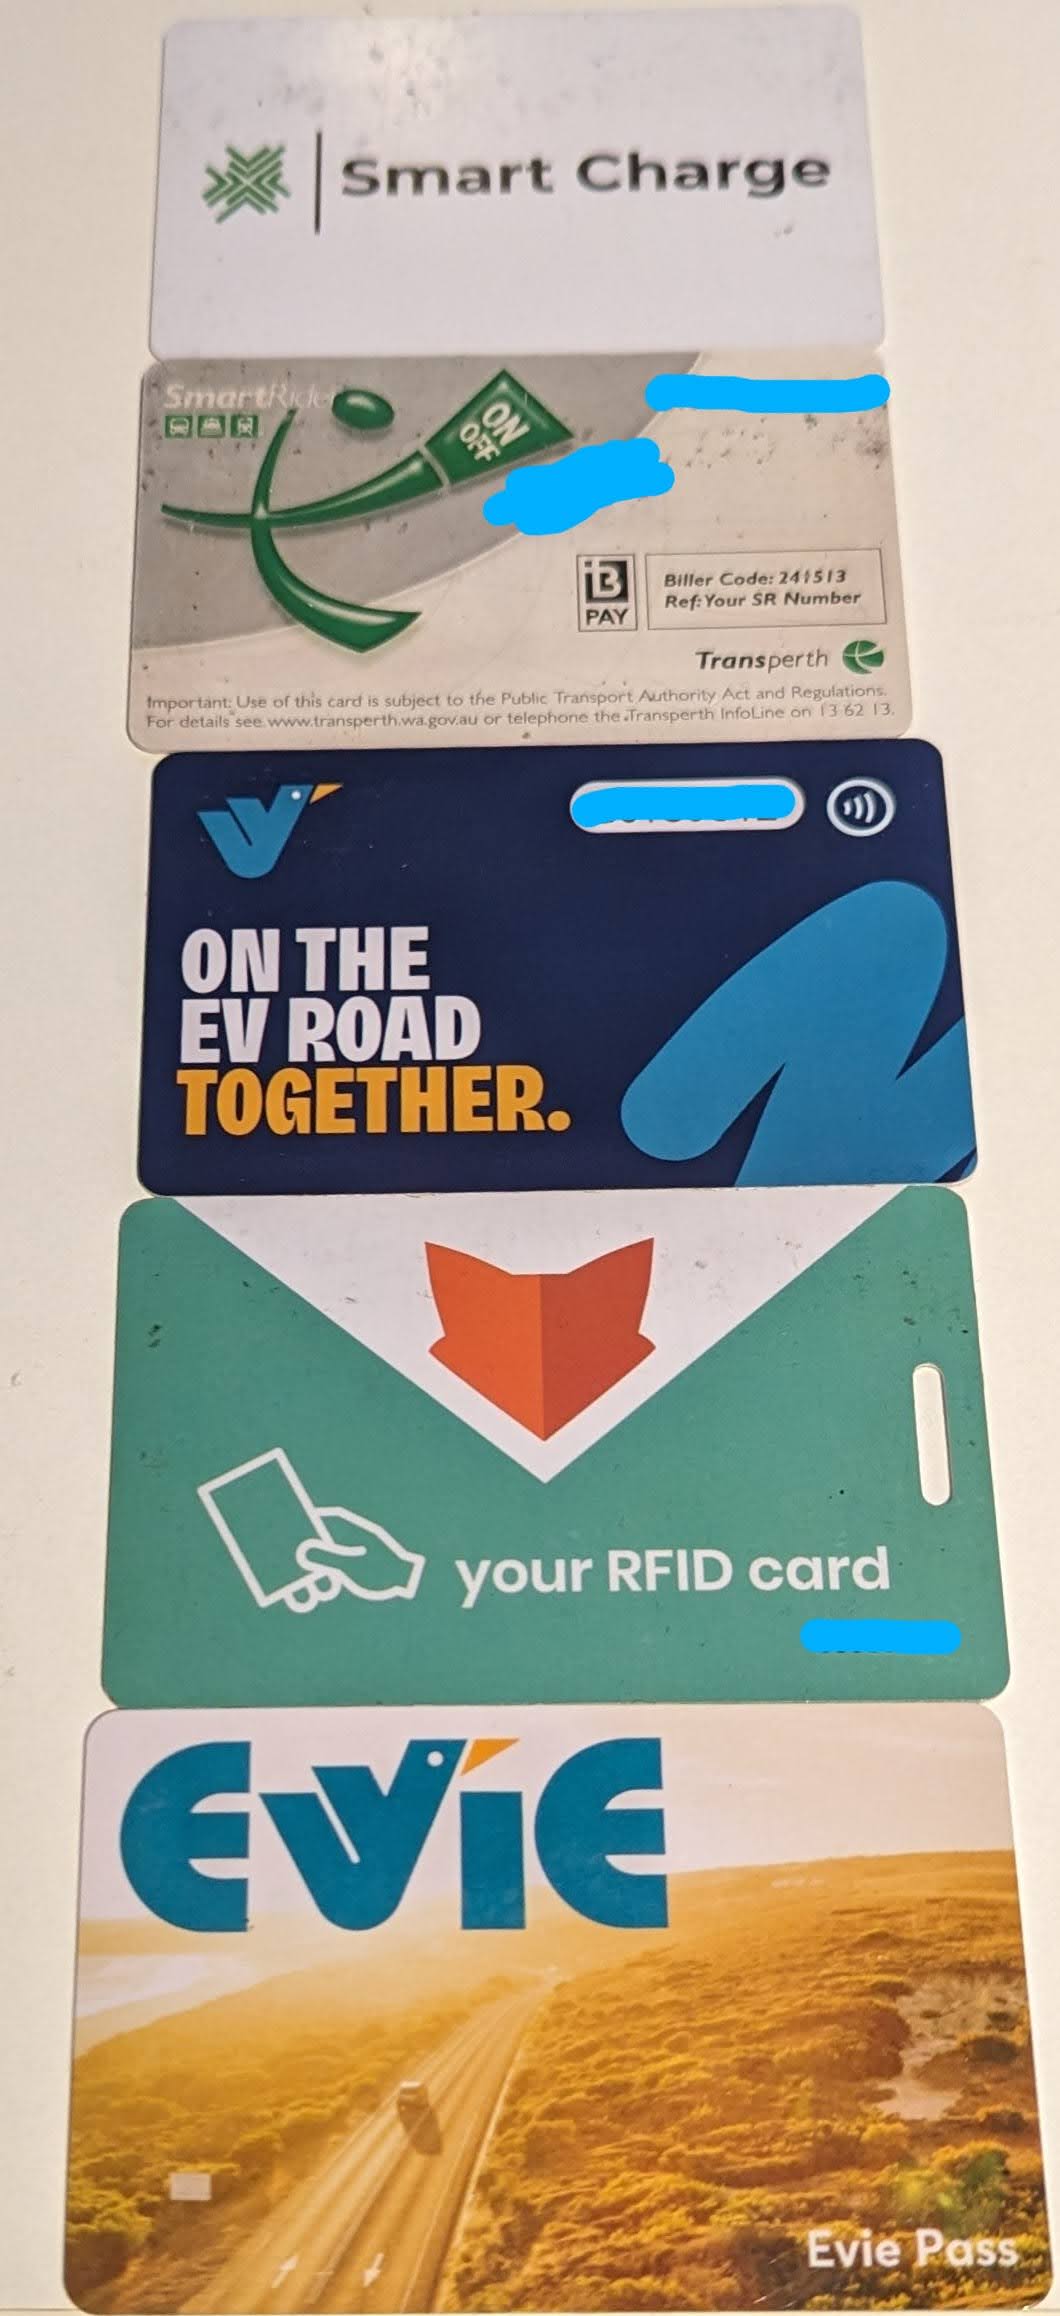 Linking RFID cards to a charging provider